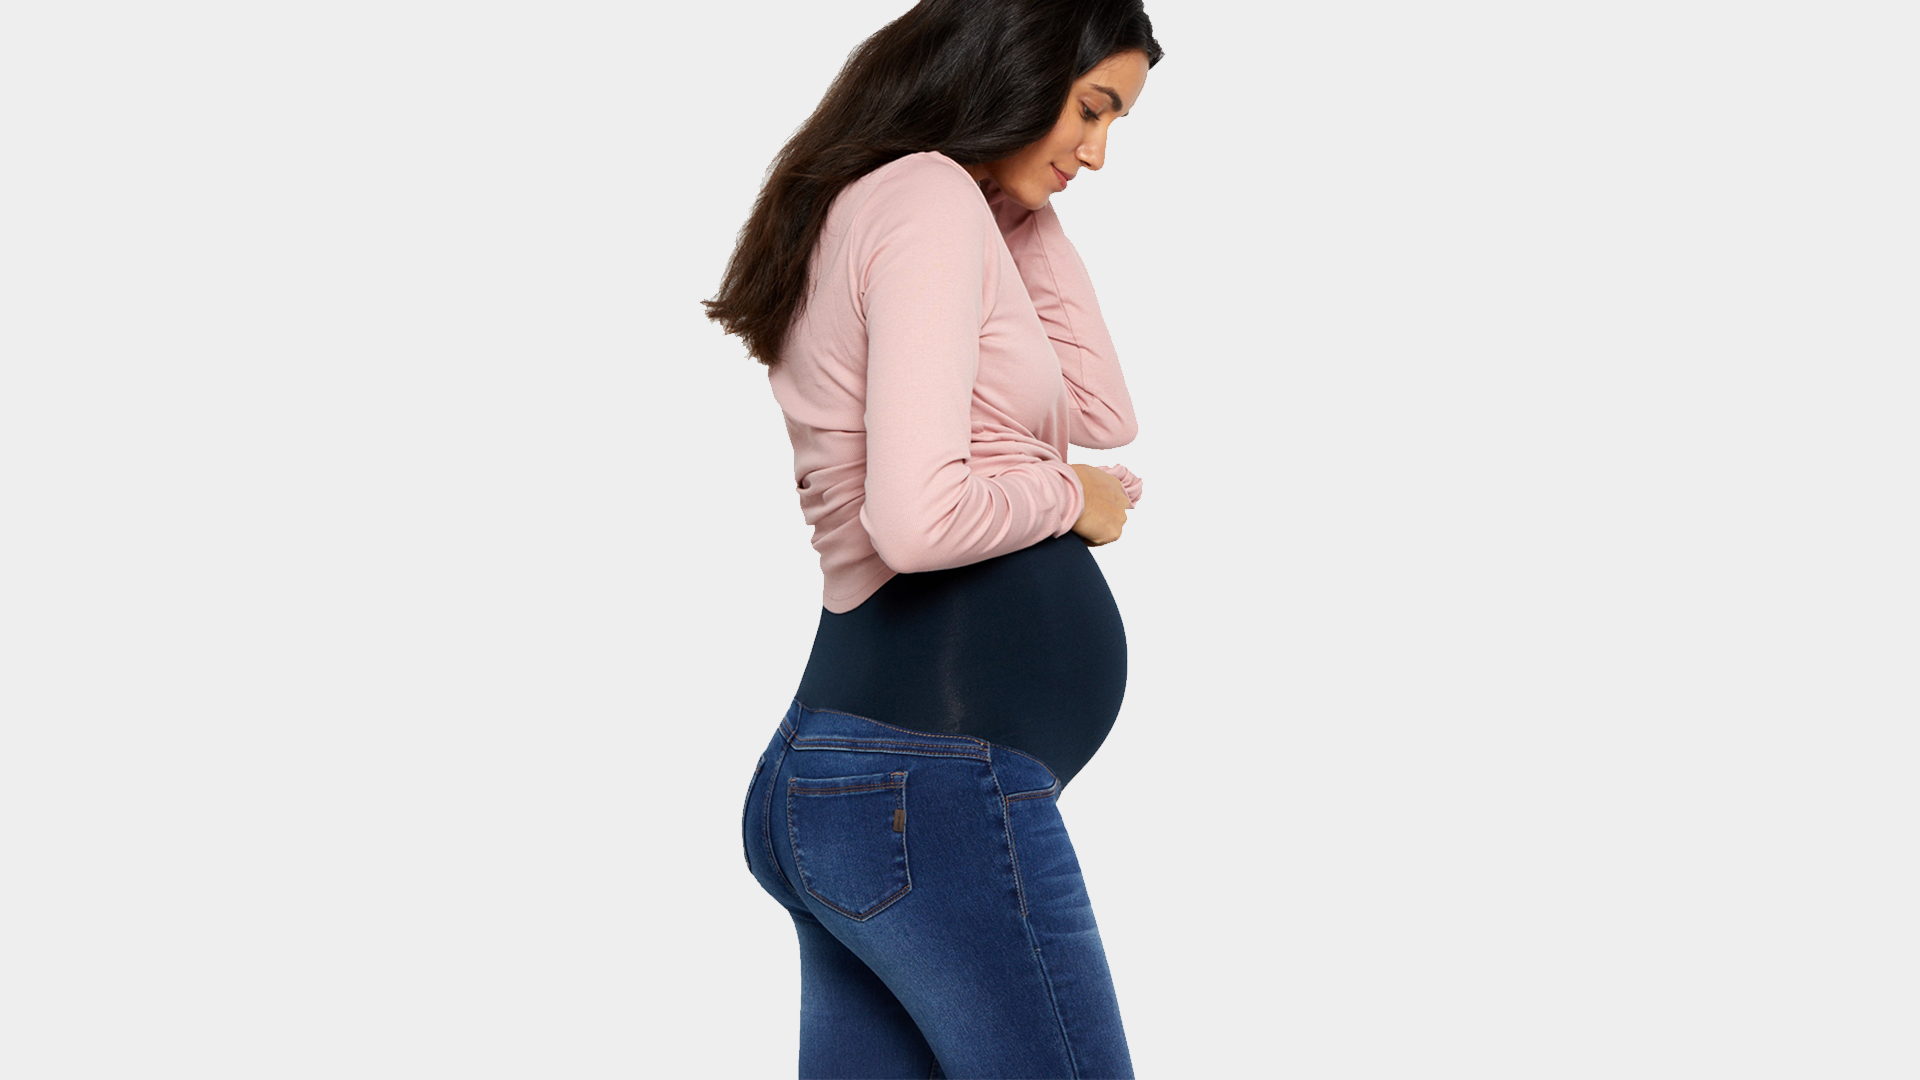 Best Maternity Photos in Jeans